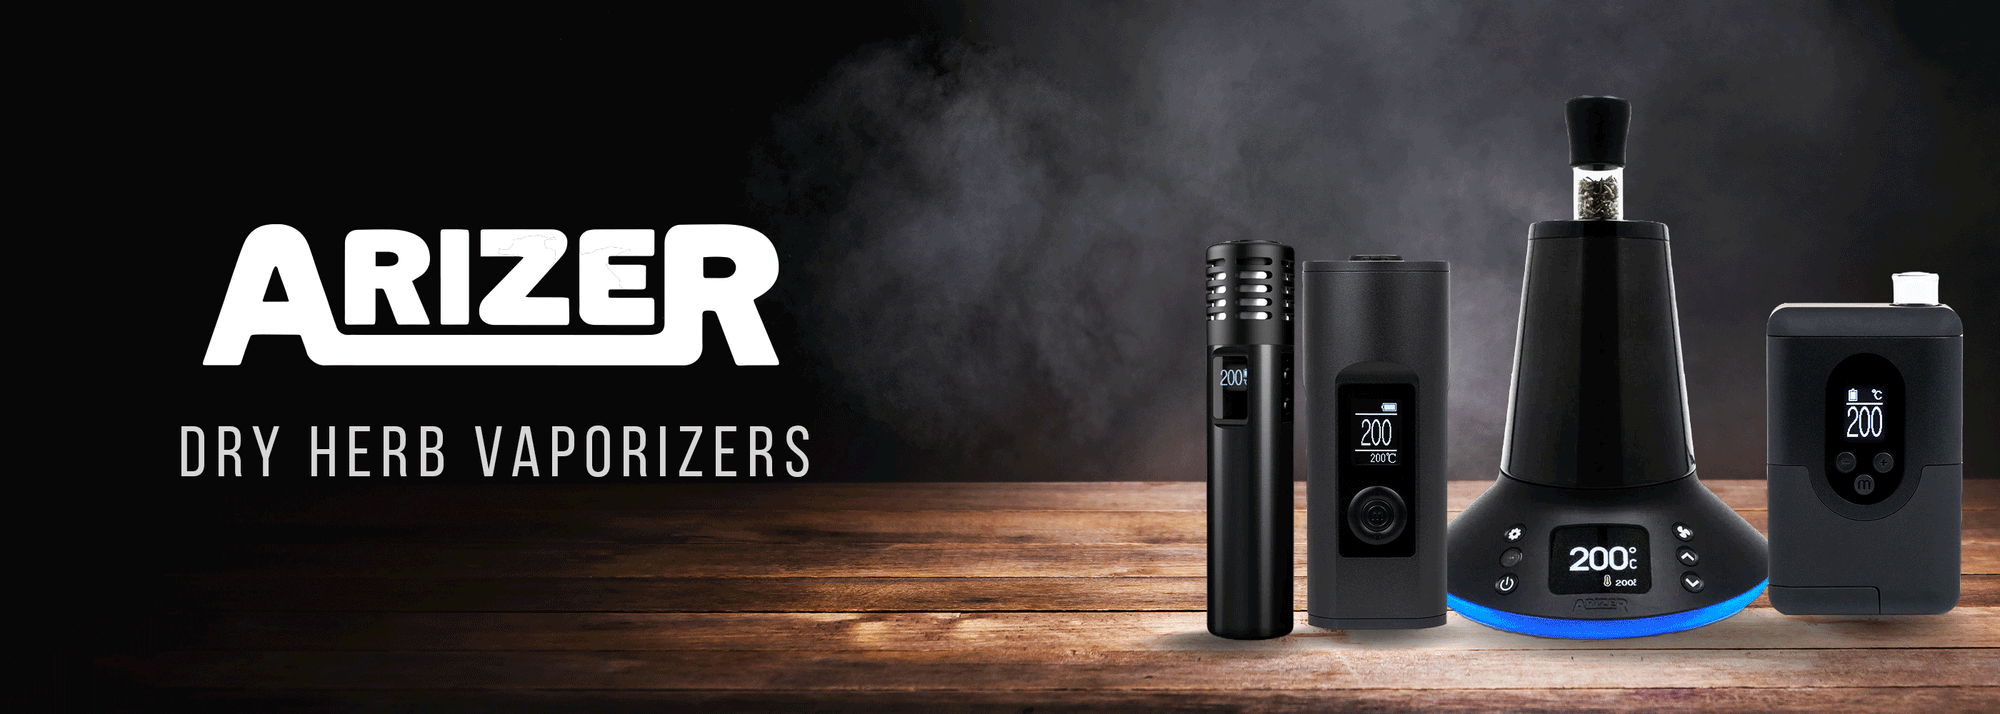 Buy Arizer Dry Herb Vaporizers | Wick and Wire Co, Melbourne Australia